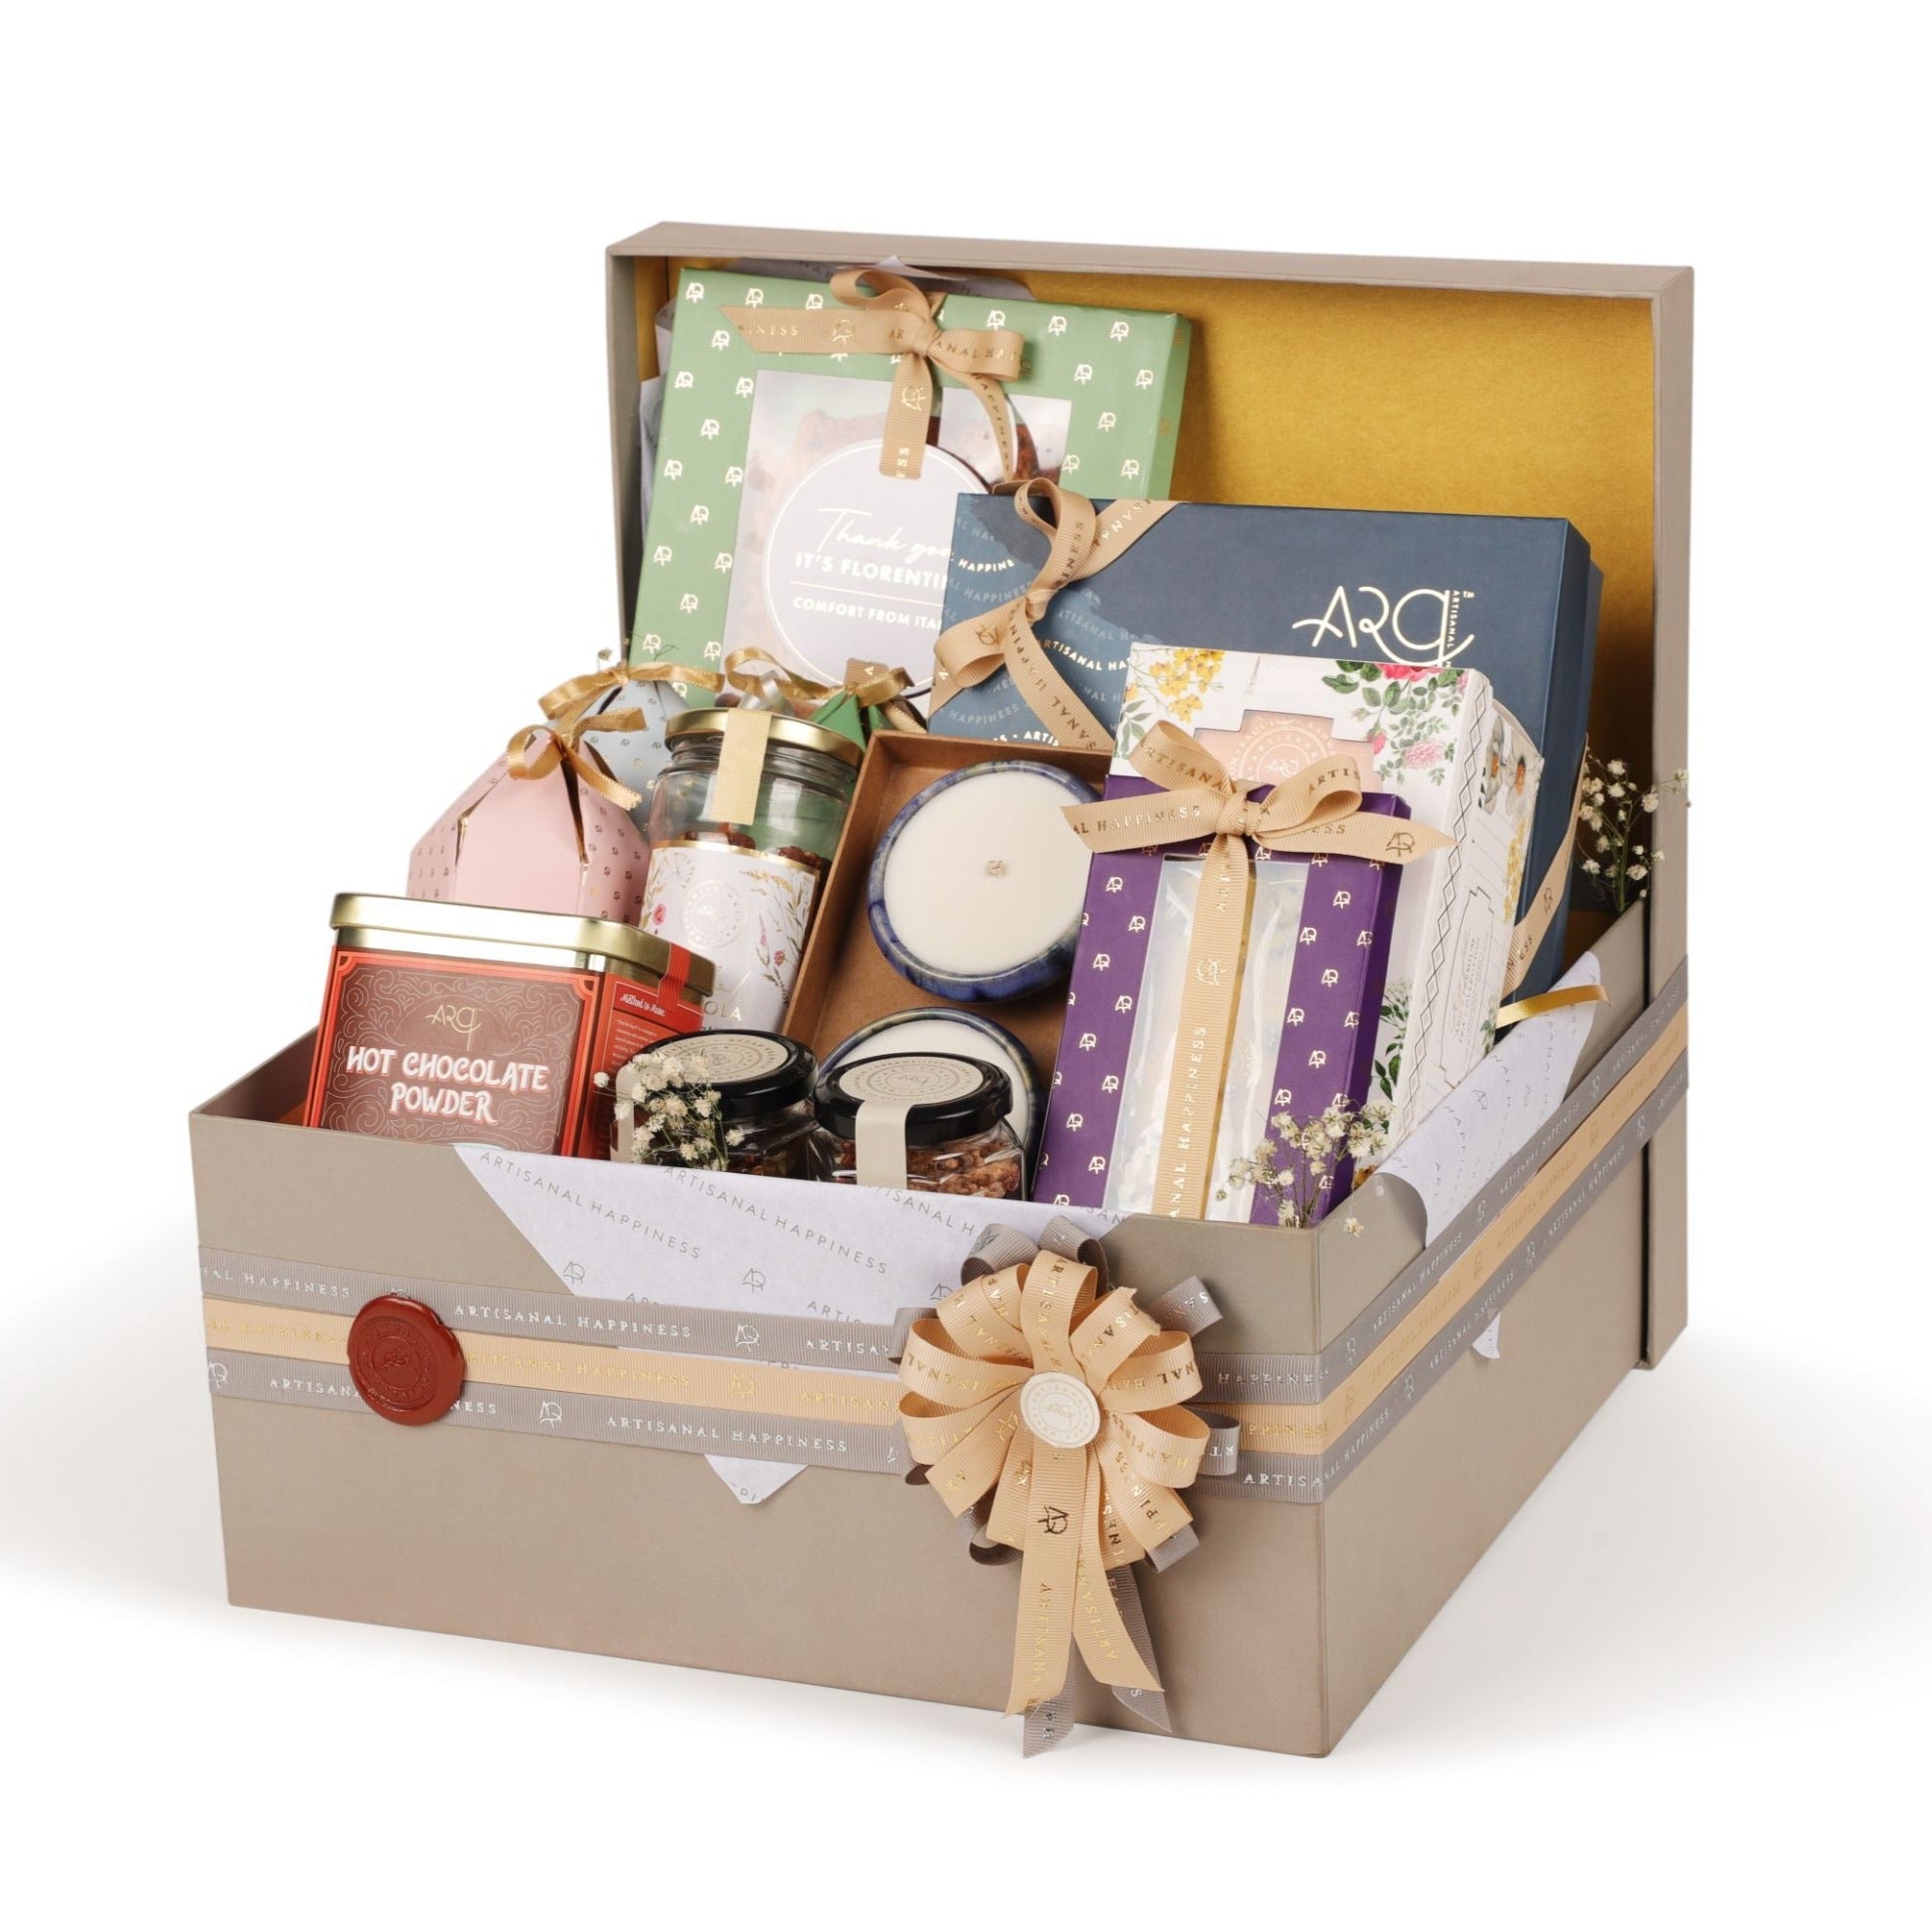 How To Make A Gift Hamper: The Only Guide You'll Need - Hand Crafted Gift  Boxes